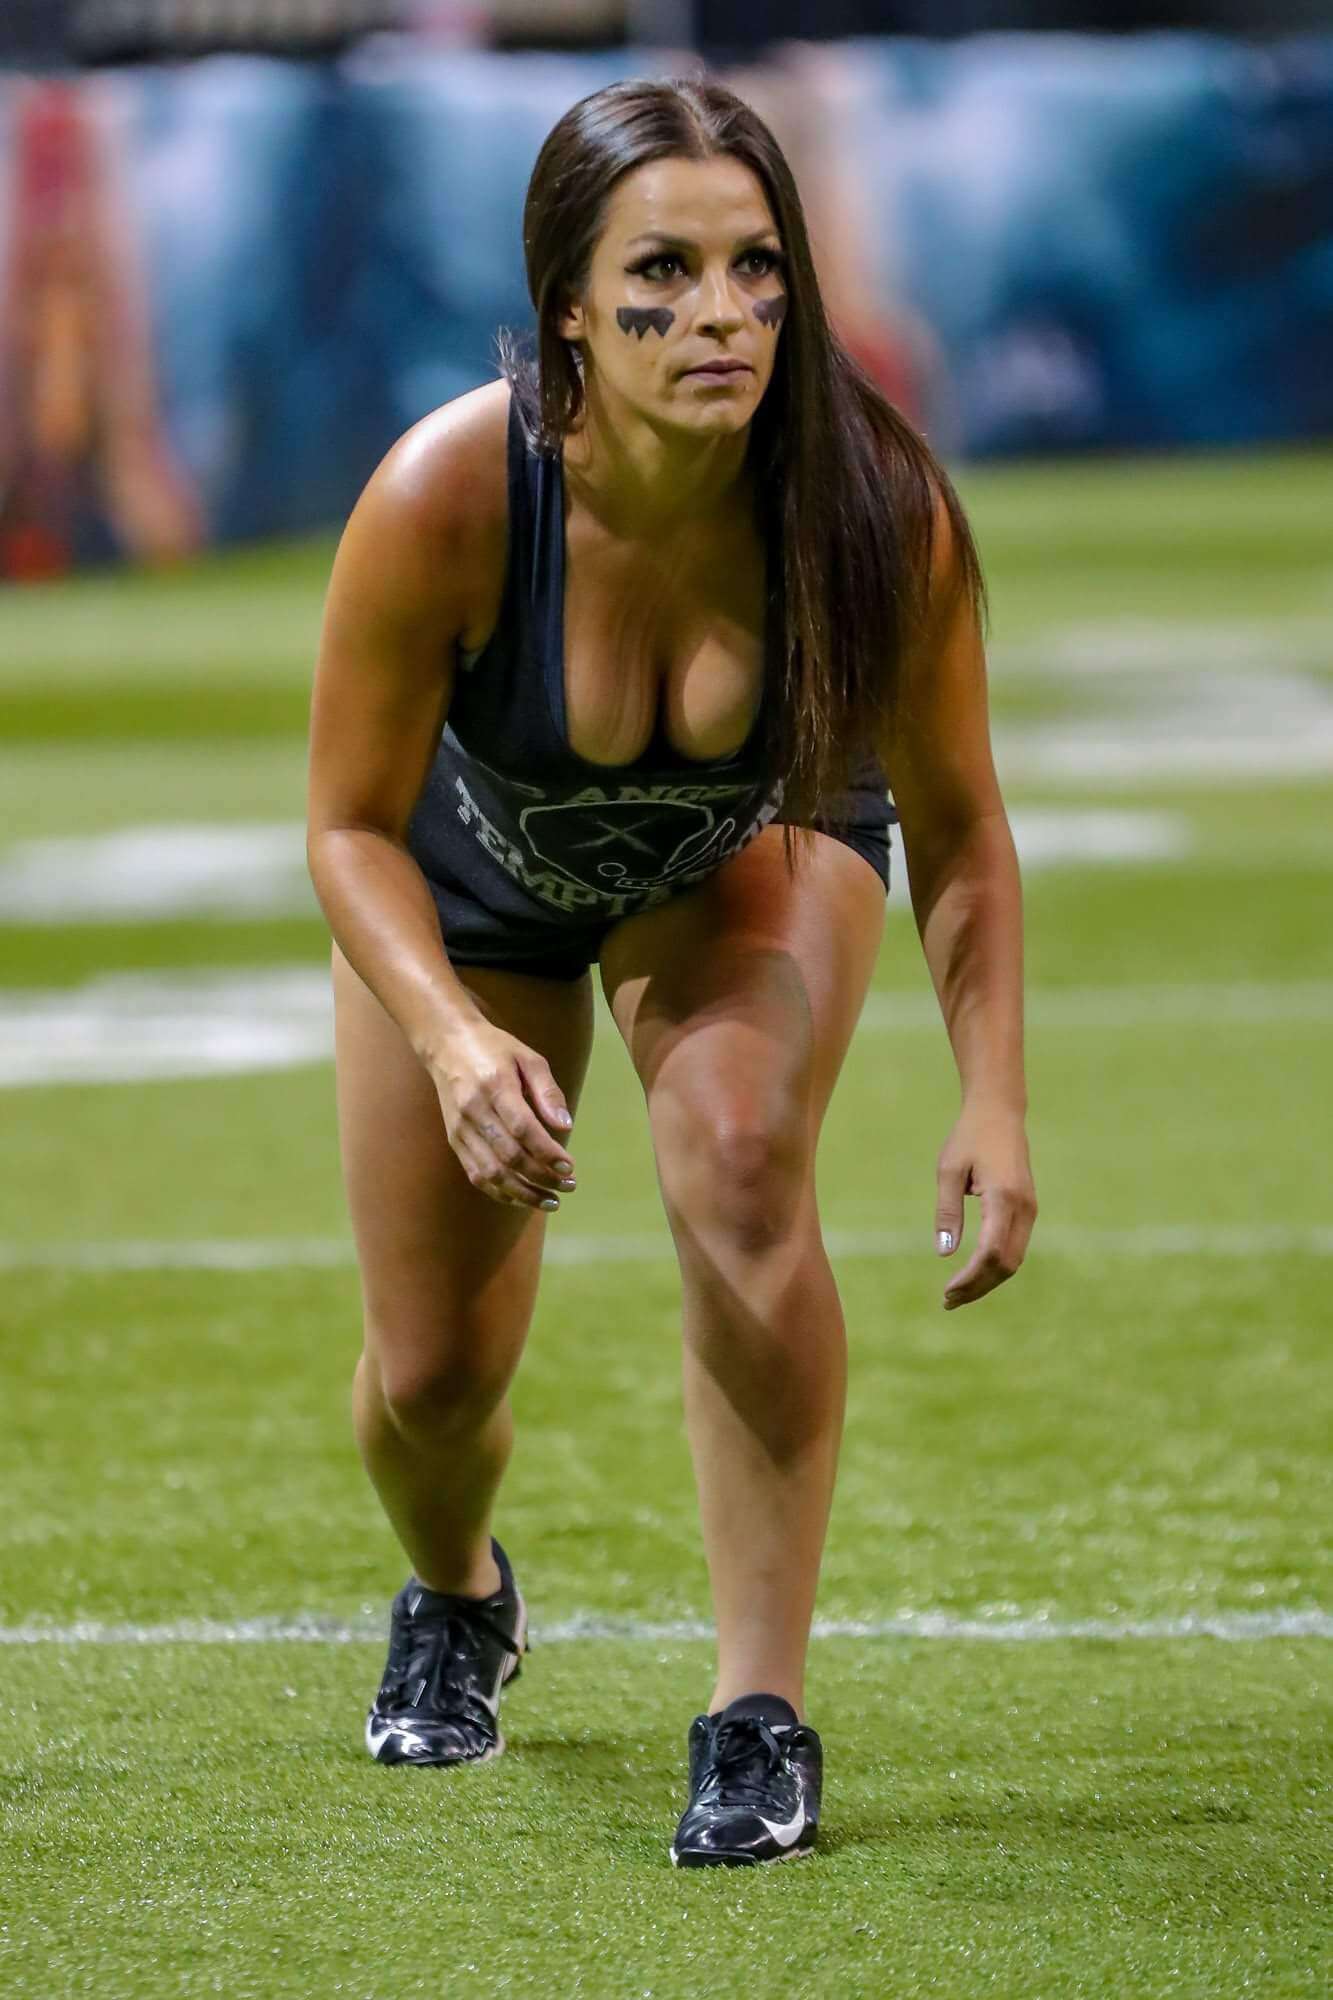 The Legends Football League Beautiful Women And Football, Need We Say Anymore! 36